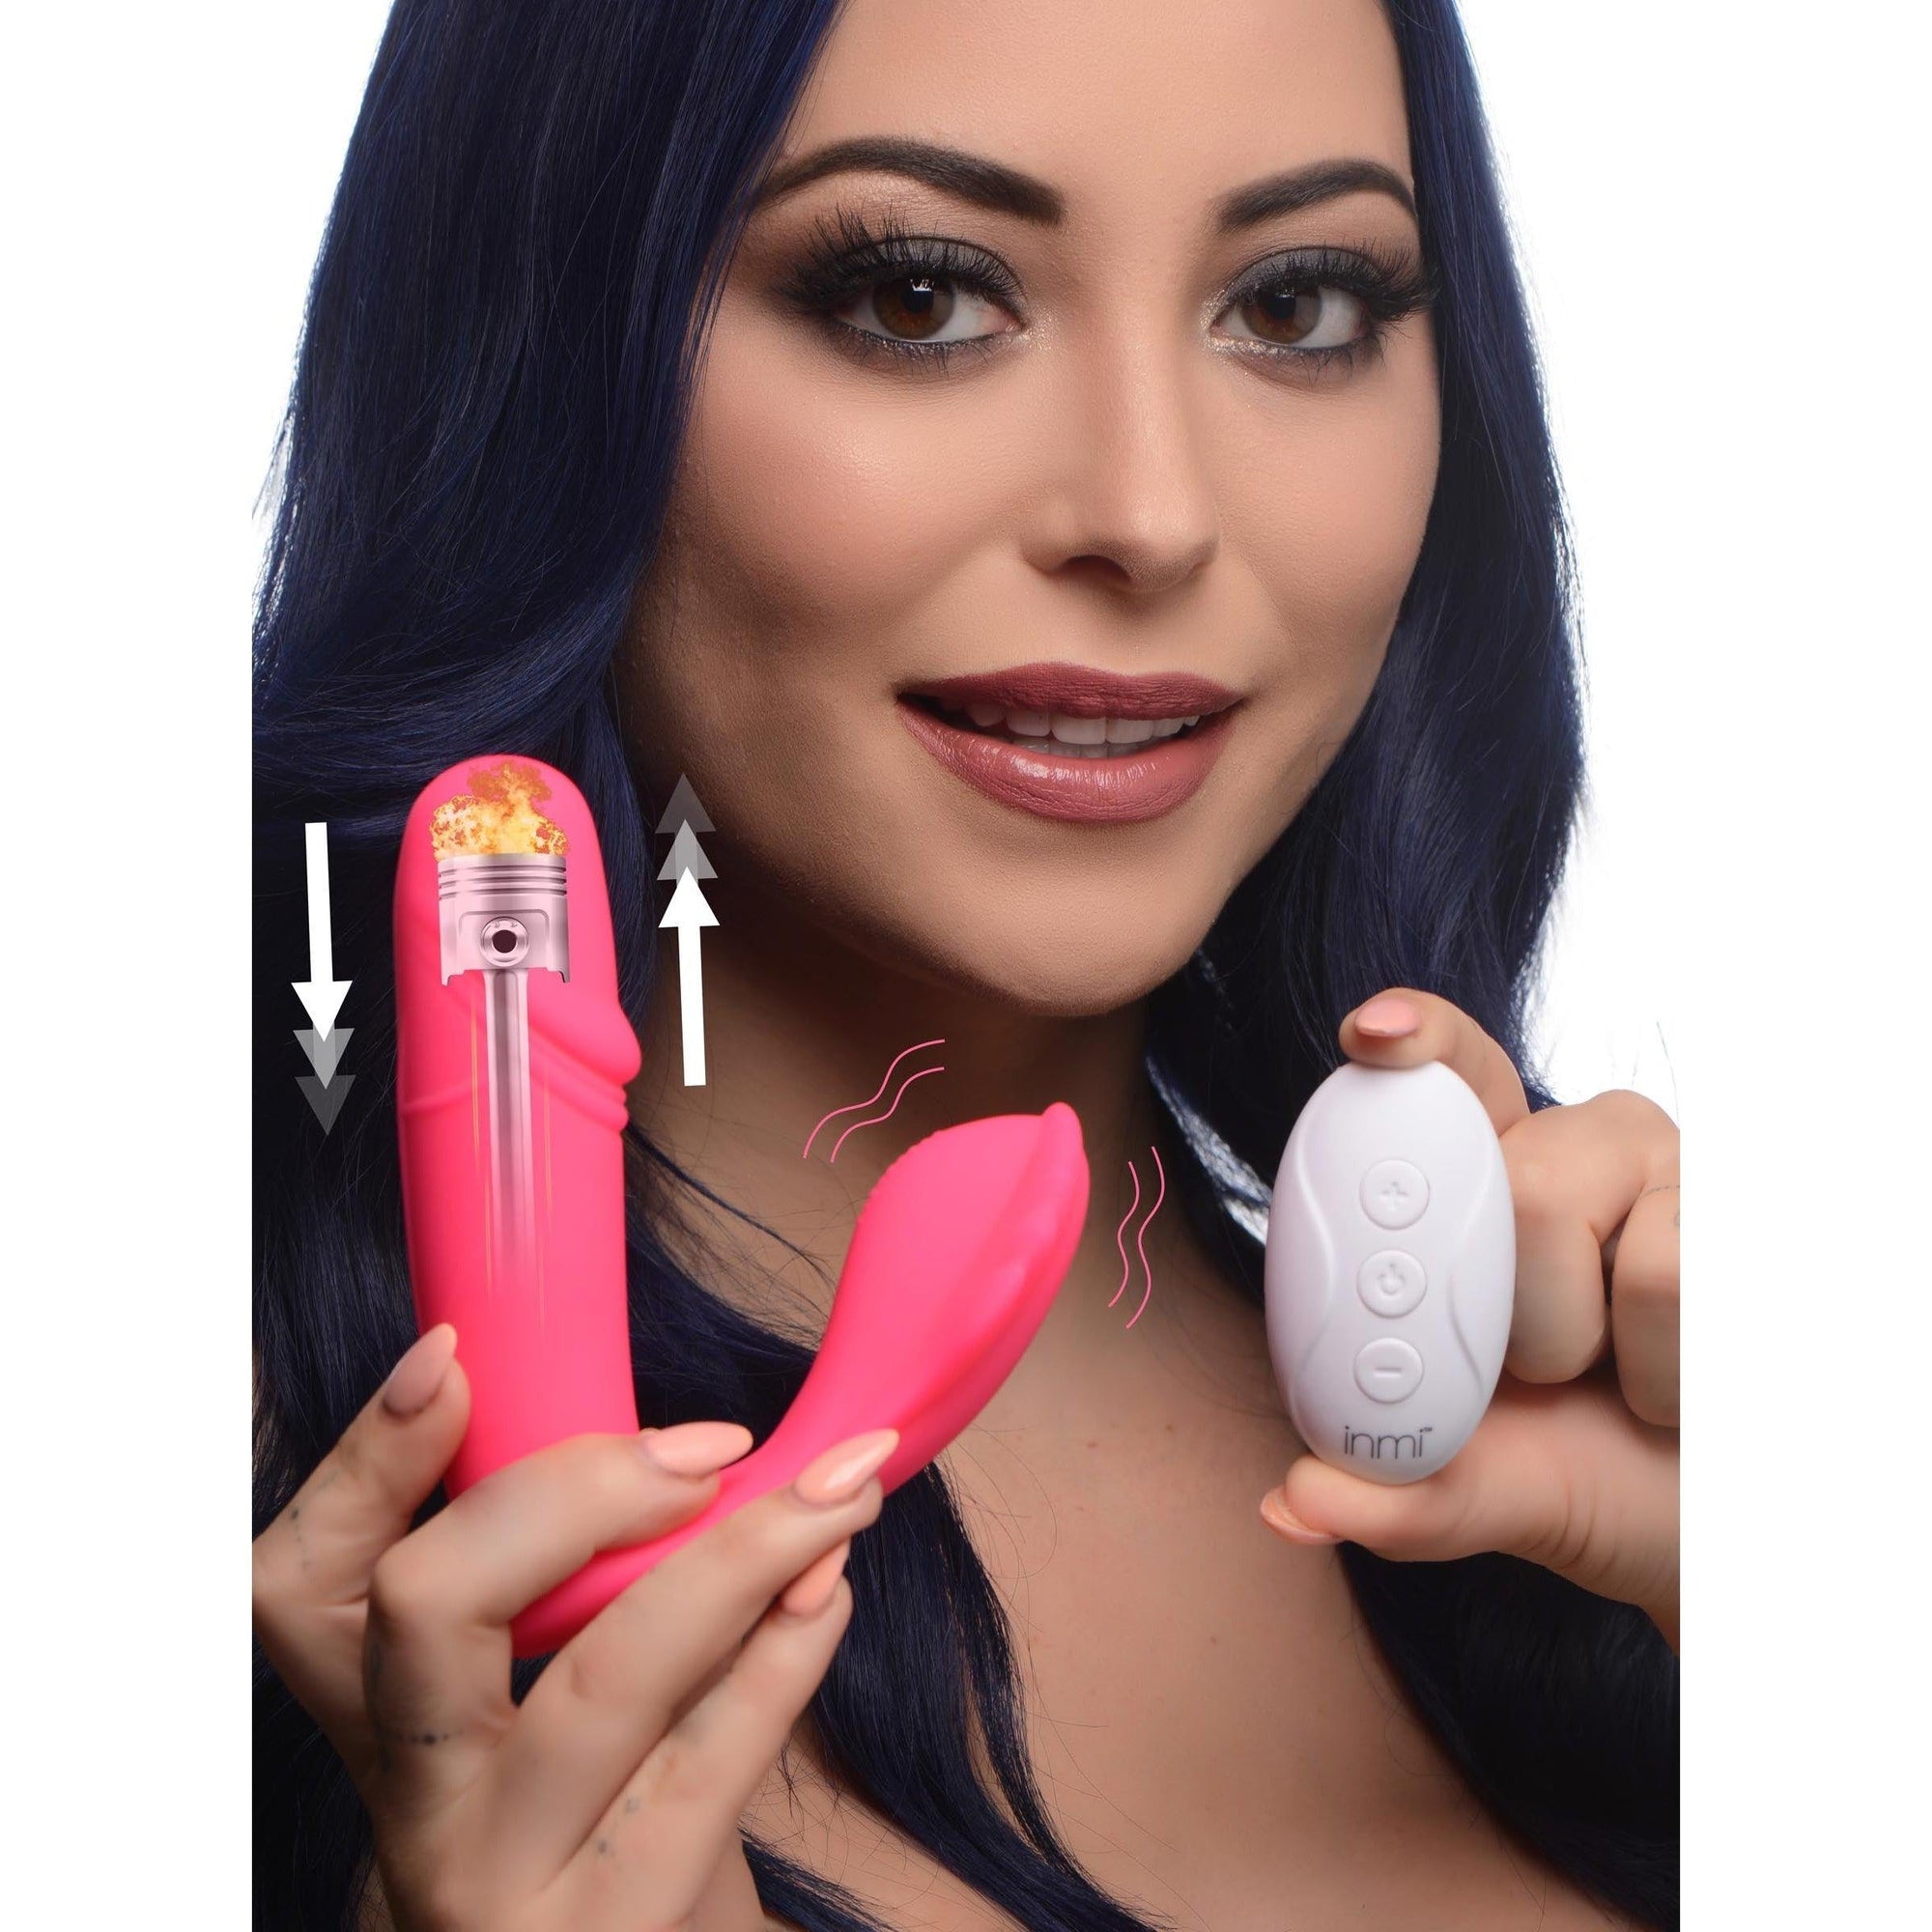 Panty Thumper 7X Thumping Silicone Vibrator with Remote Control